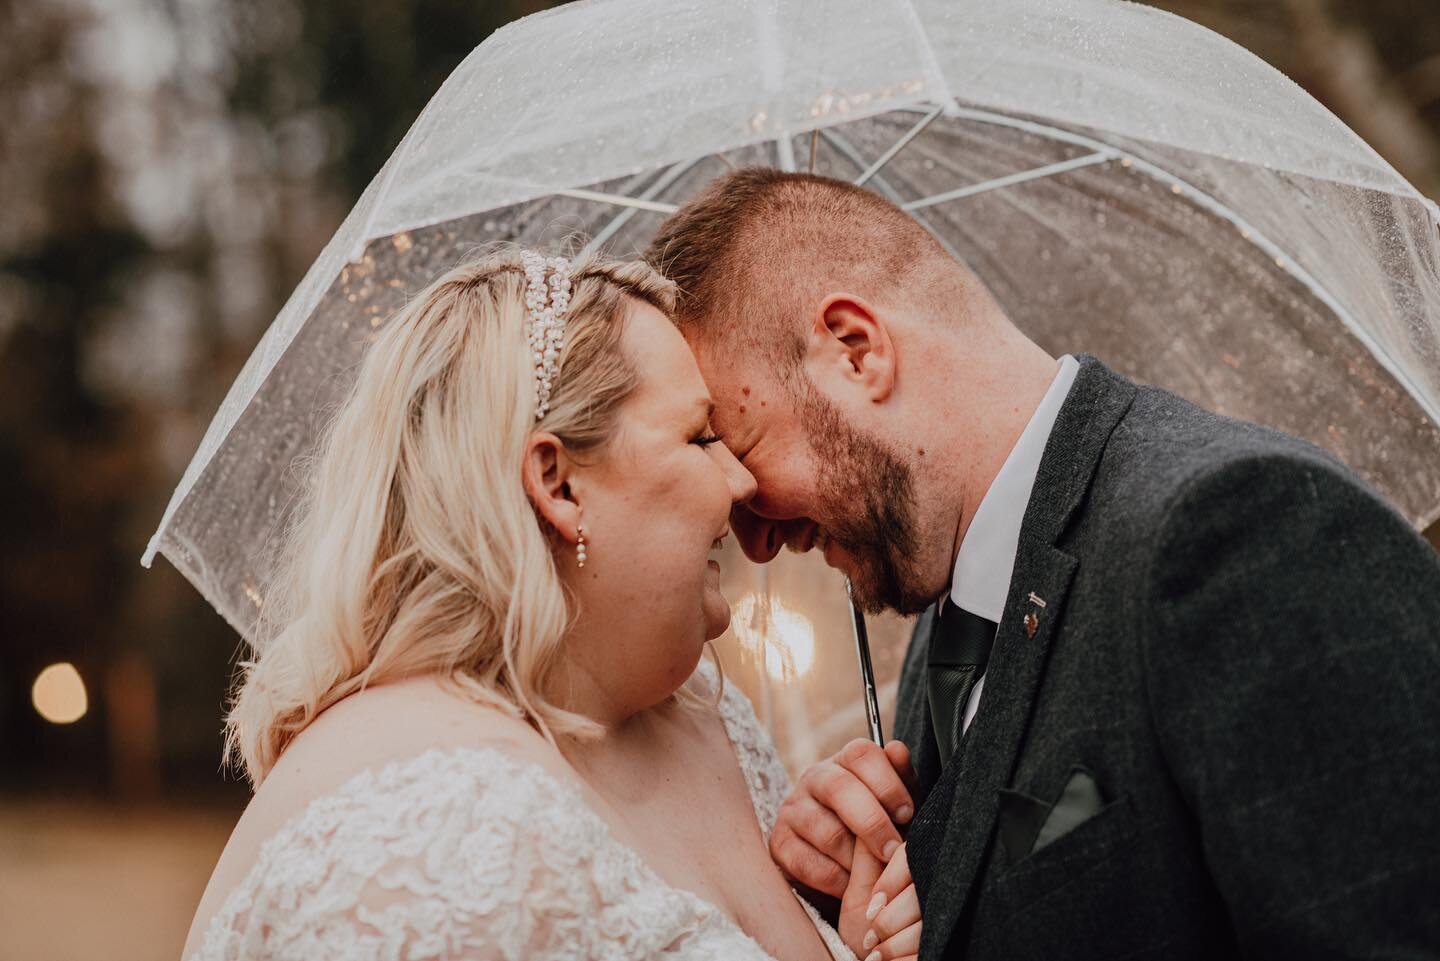 A beautiful couples pic from Harry and Becka&rsquo;s wedding a couple of weeks ago. Rain can be a bit off putting for pics but it never hurt anyone! Thankfully they were super game to get out there under an umbrella and the results were unreal! First